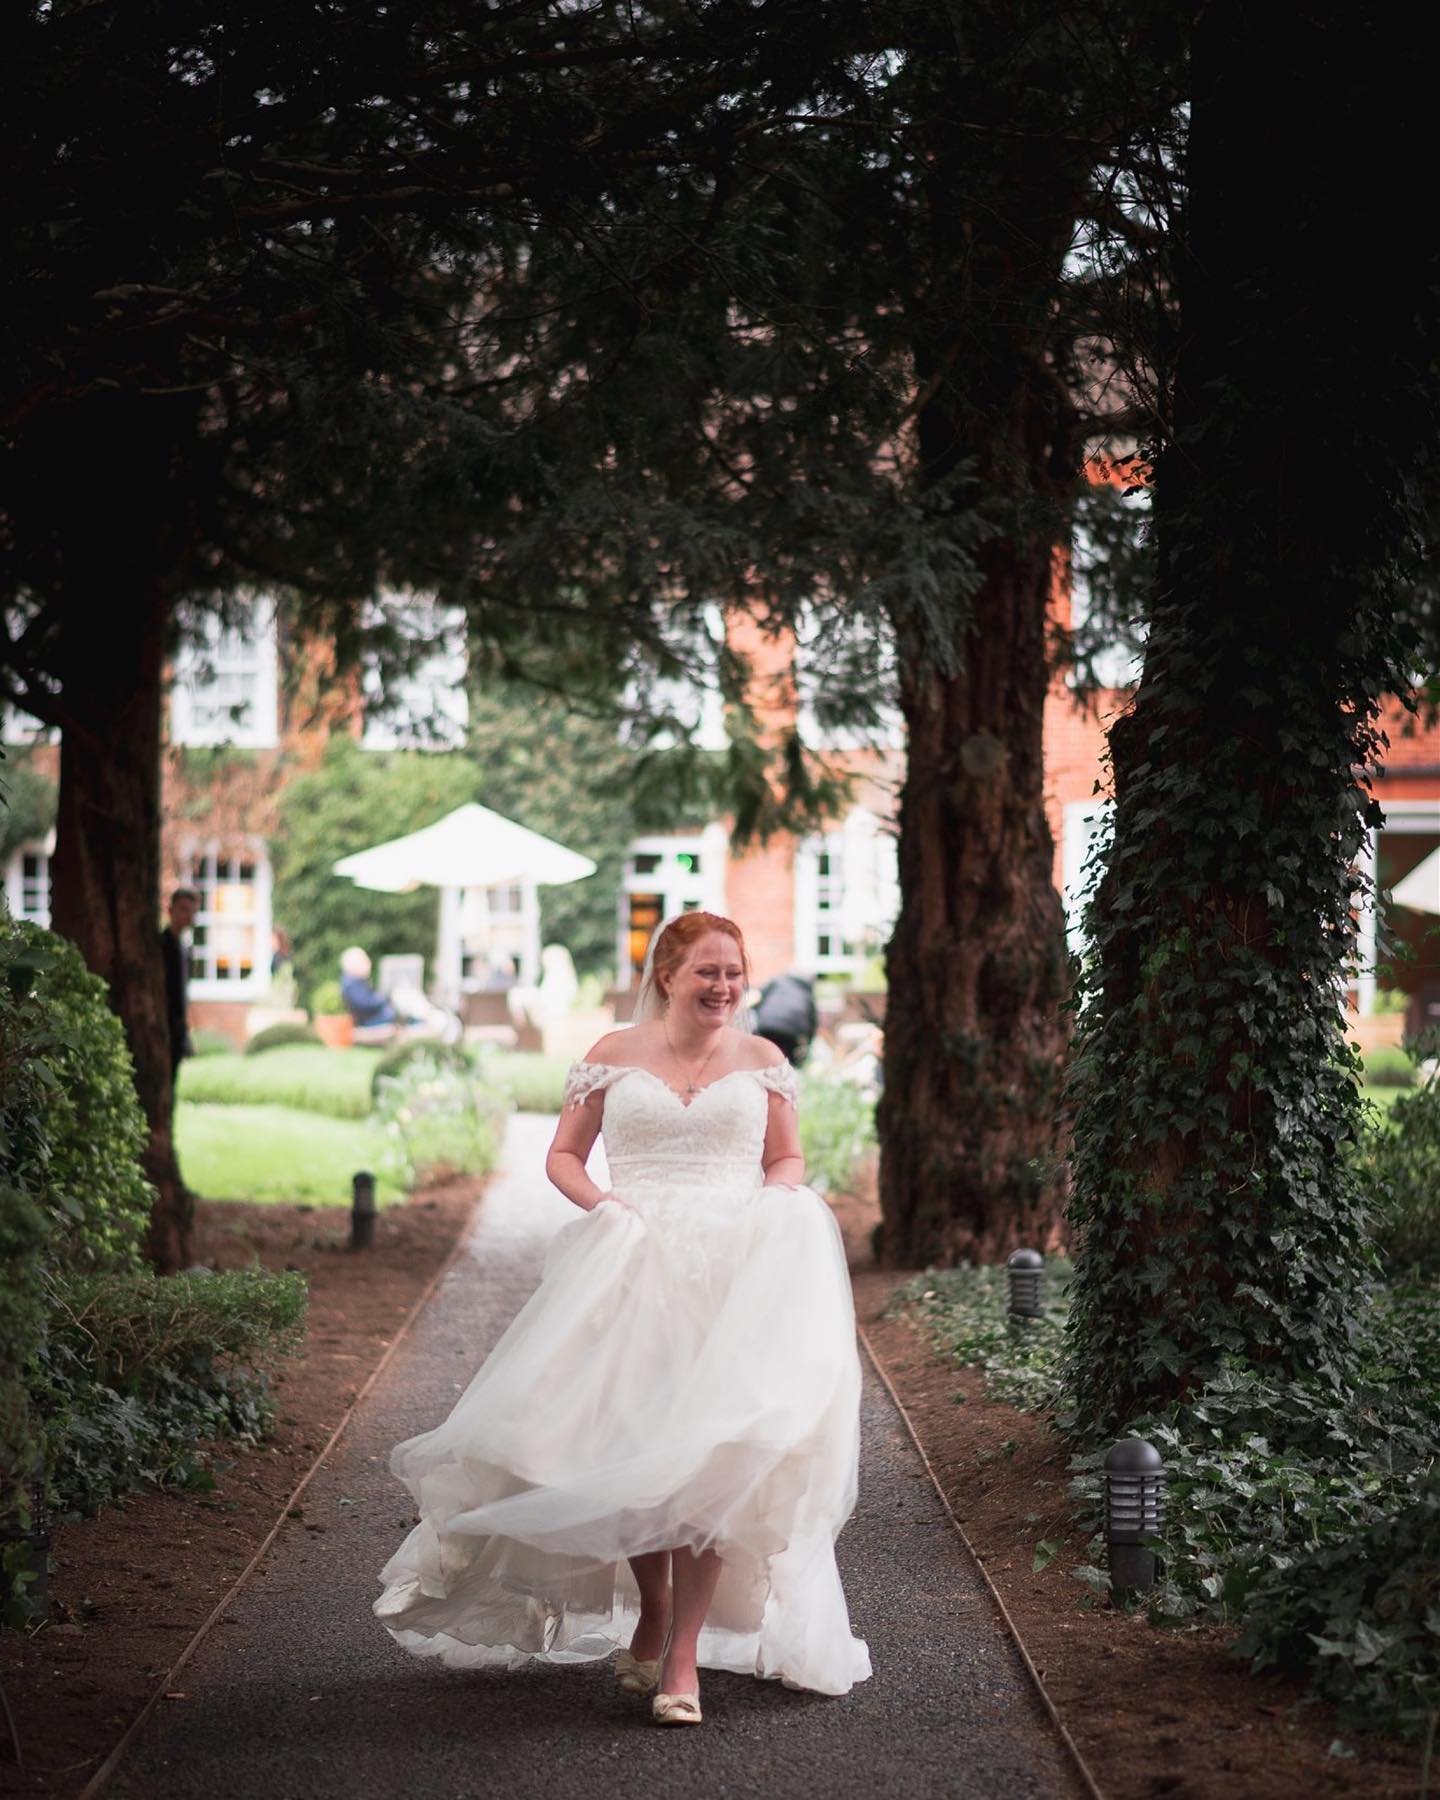 If this made you smile pass it on!

&ldquo;Love, laughter, and happily ever after. Capturing the beautiful moments of Leanne and Ben&rsquo;s wedding at the Bush Hotel in Farnham. ☀️💍✨ #WeddingBliss #HappilyEverAfter #LoveInFullBloom&rdquo;